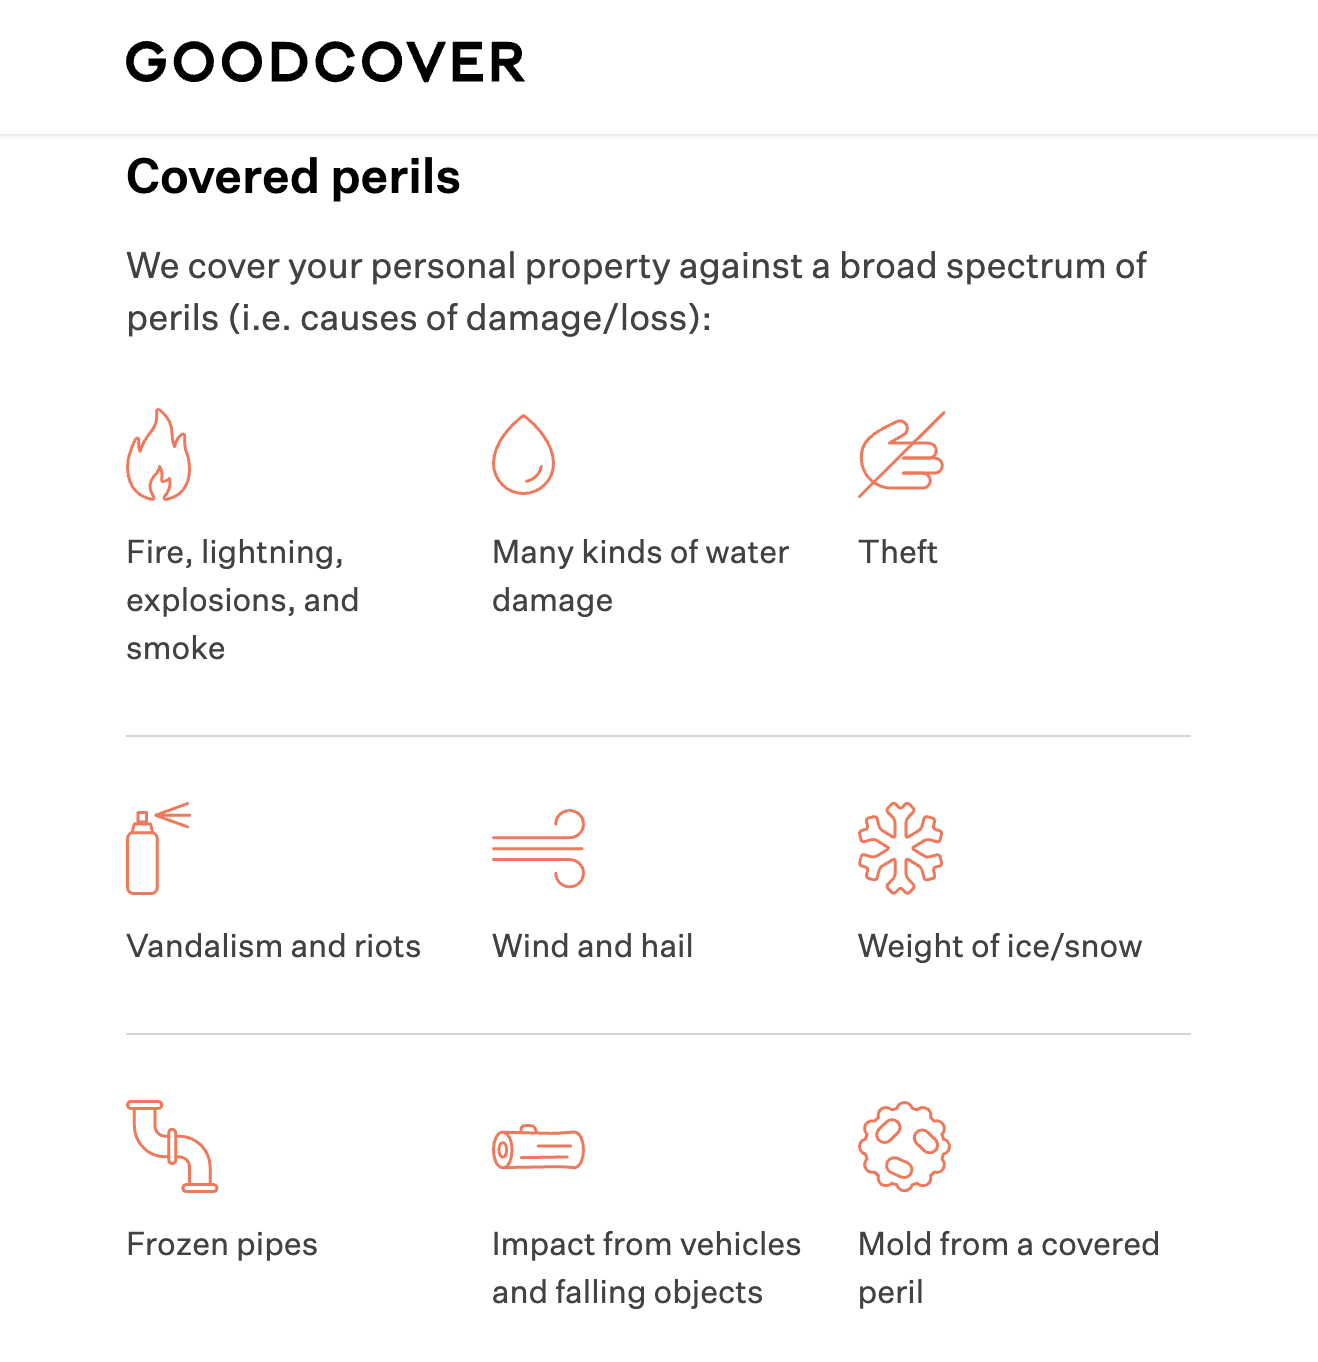 Goodcover’s Guide to Renters Insurance in Phoenix, AZ